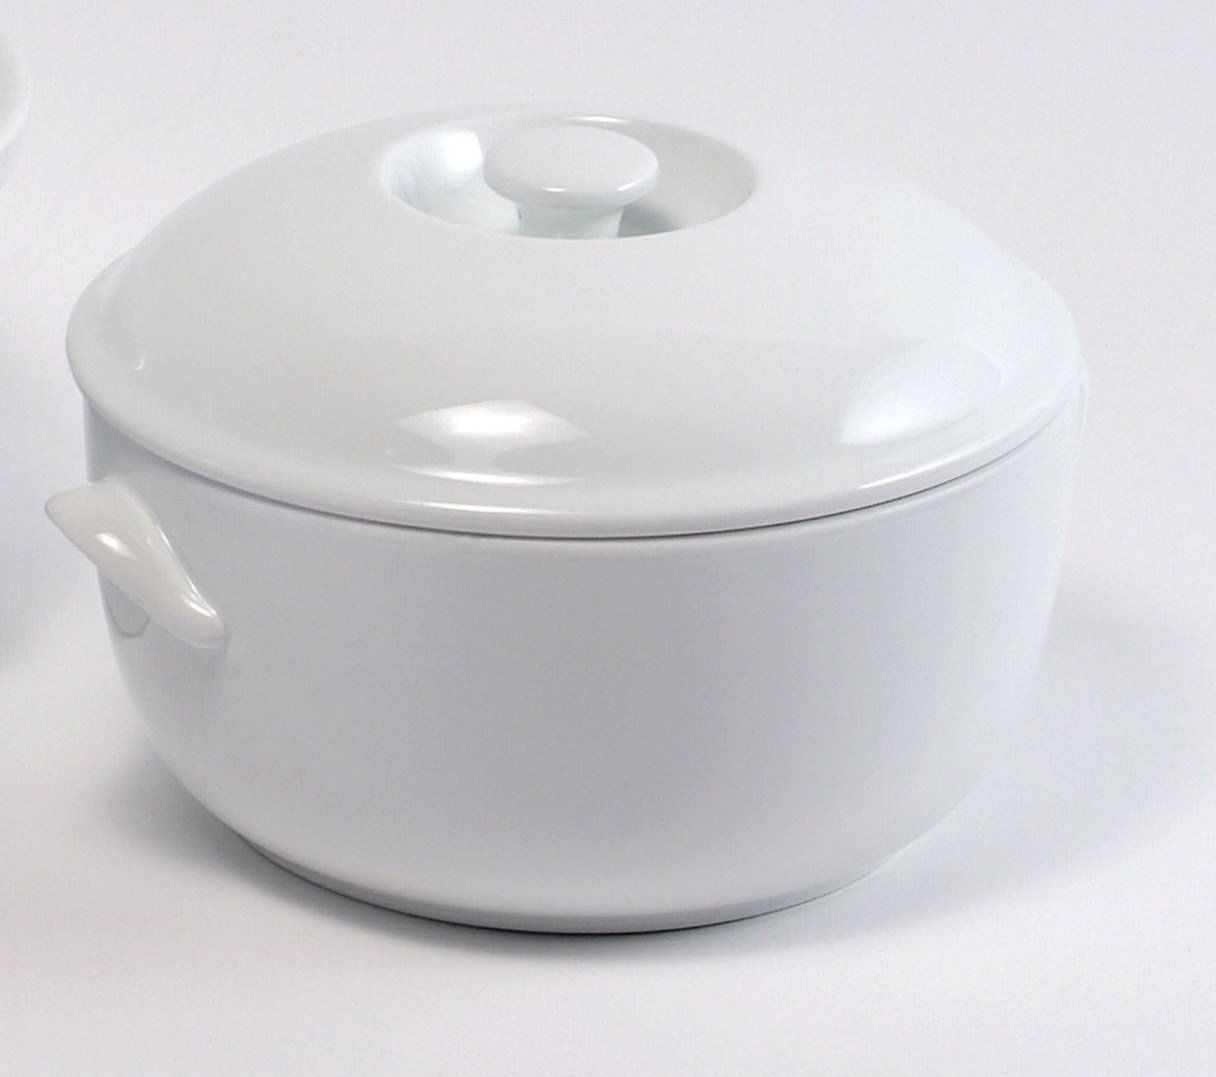 Round Covered Dish Hire Return Clean or Dirty Option Available